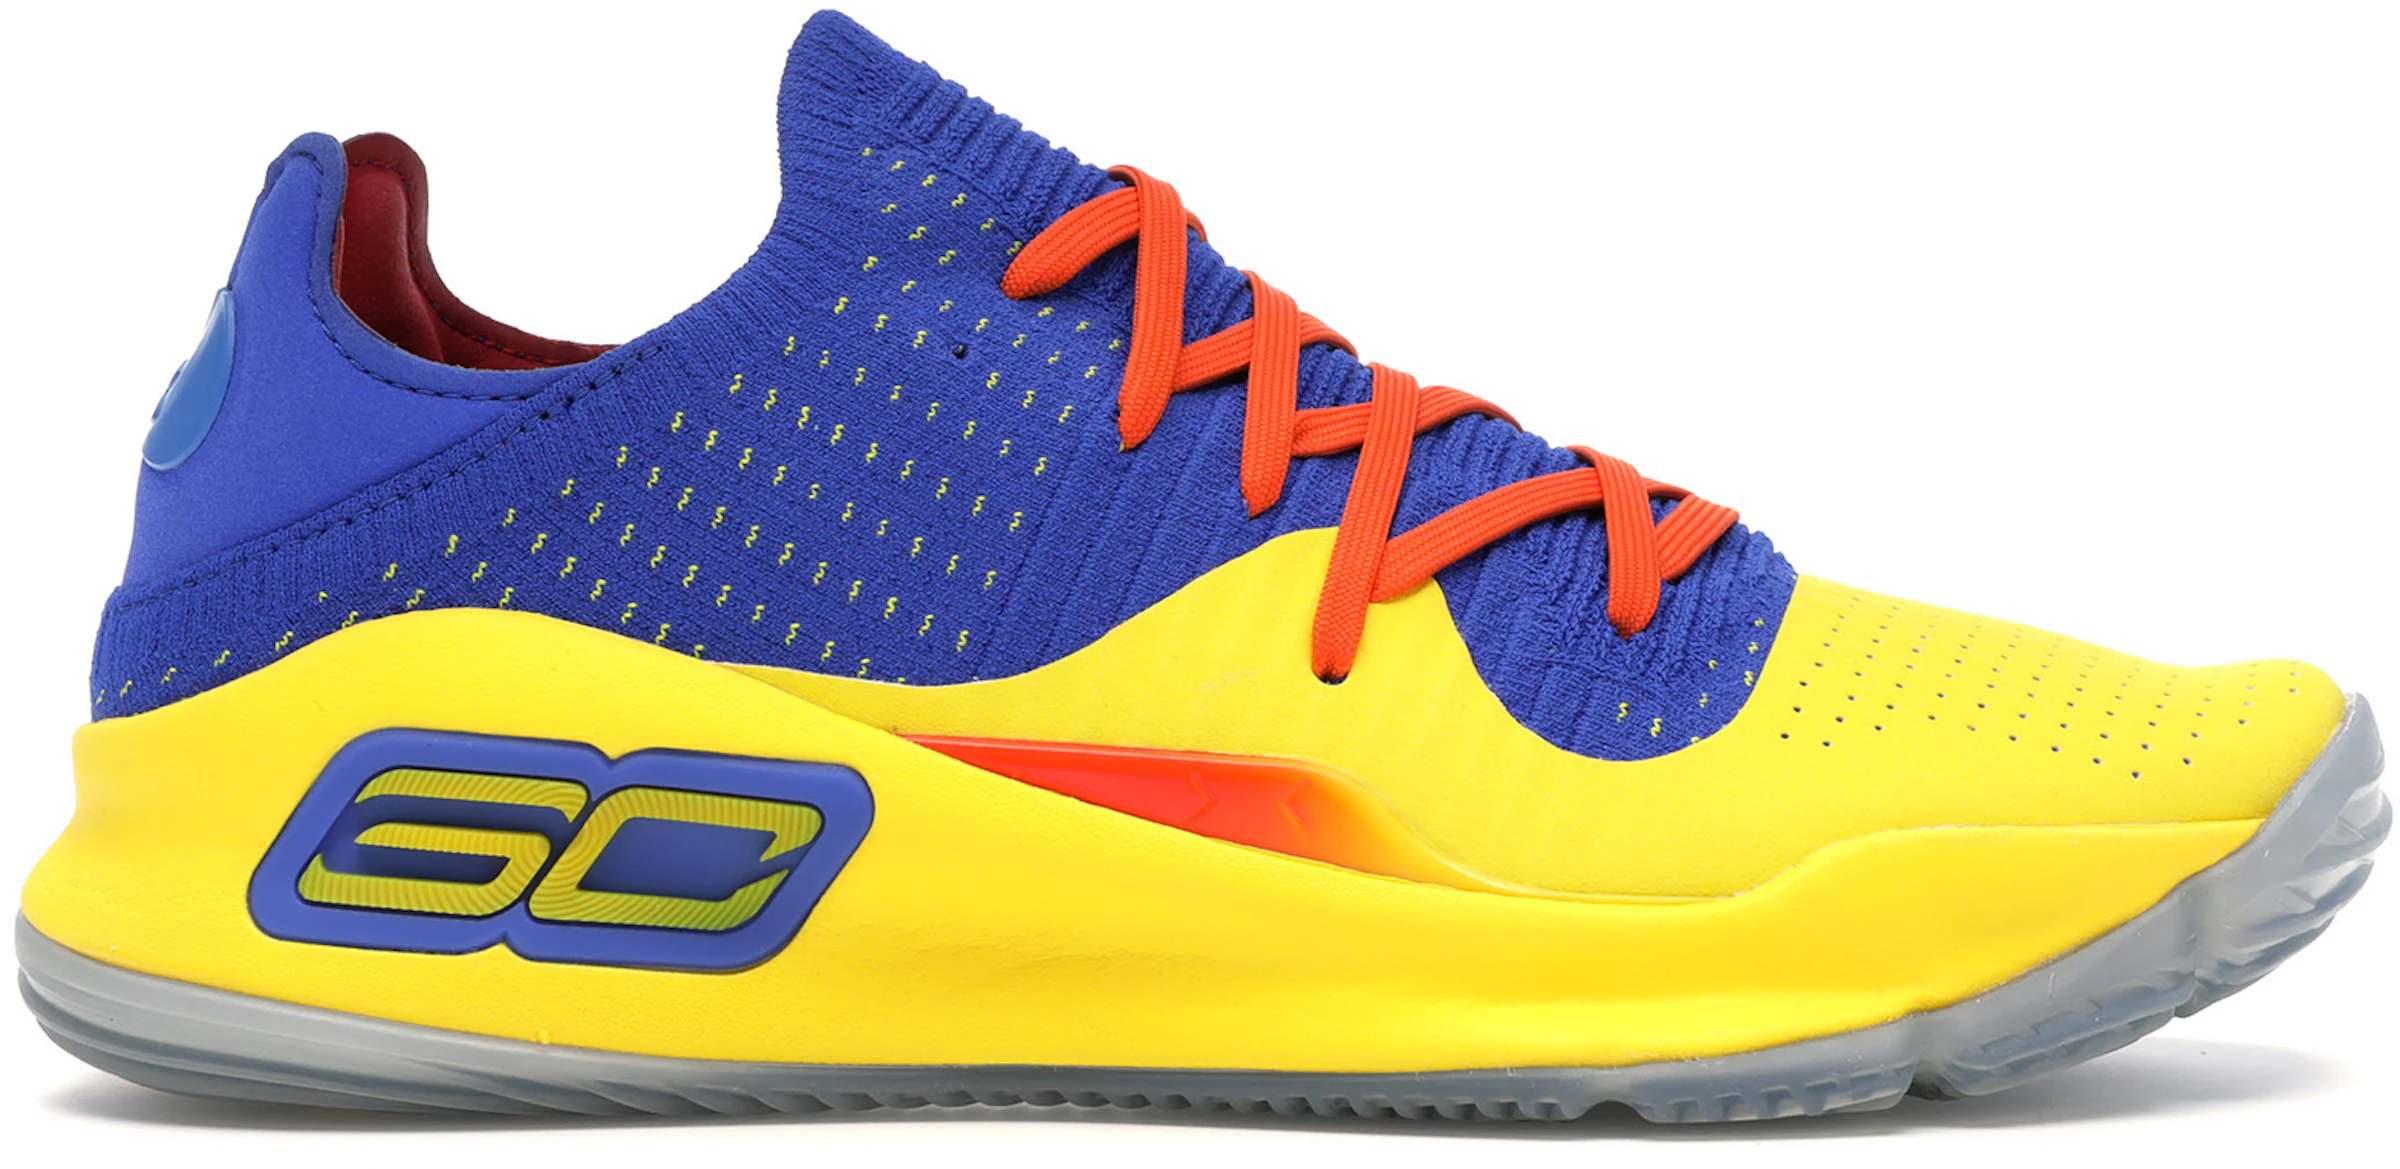 Under Armour Curry 4 NBA - 3000083-402 - ES